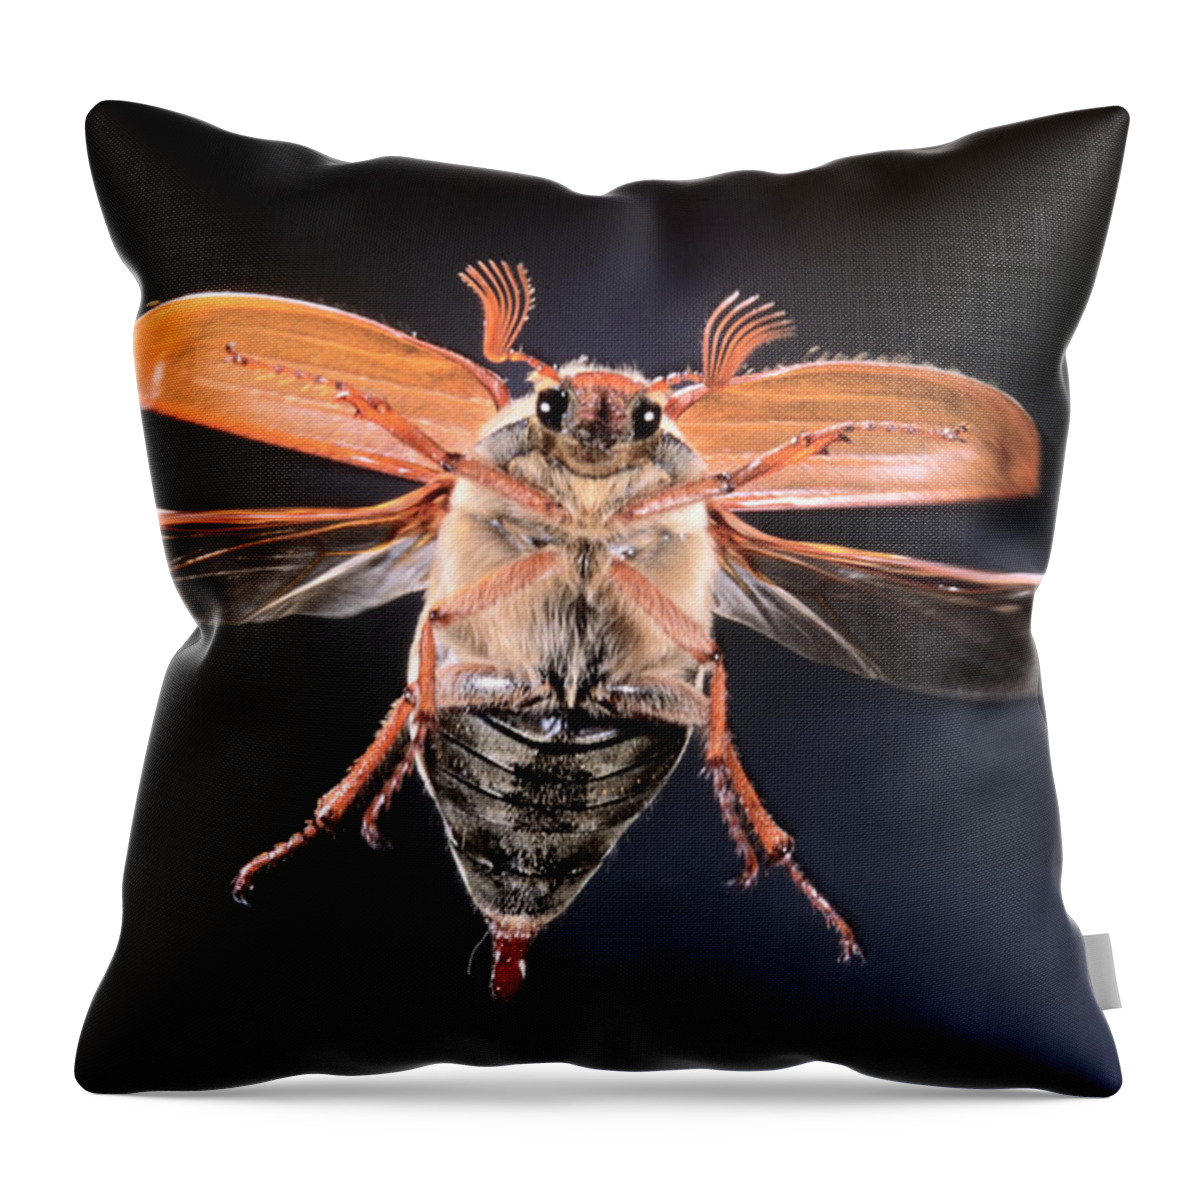 Nis Throw Pillow featuring the photograph Common Cockchafer Flying by Jef Meul